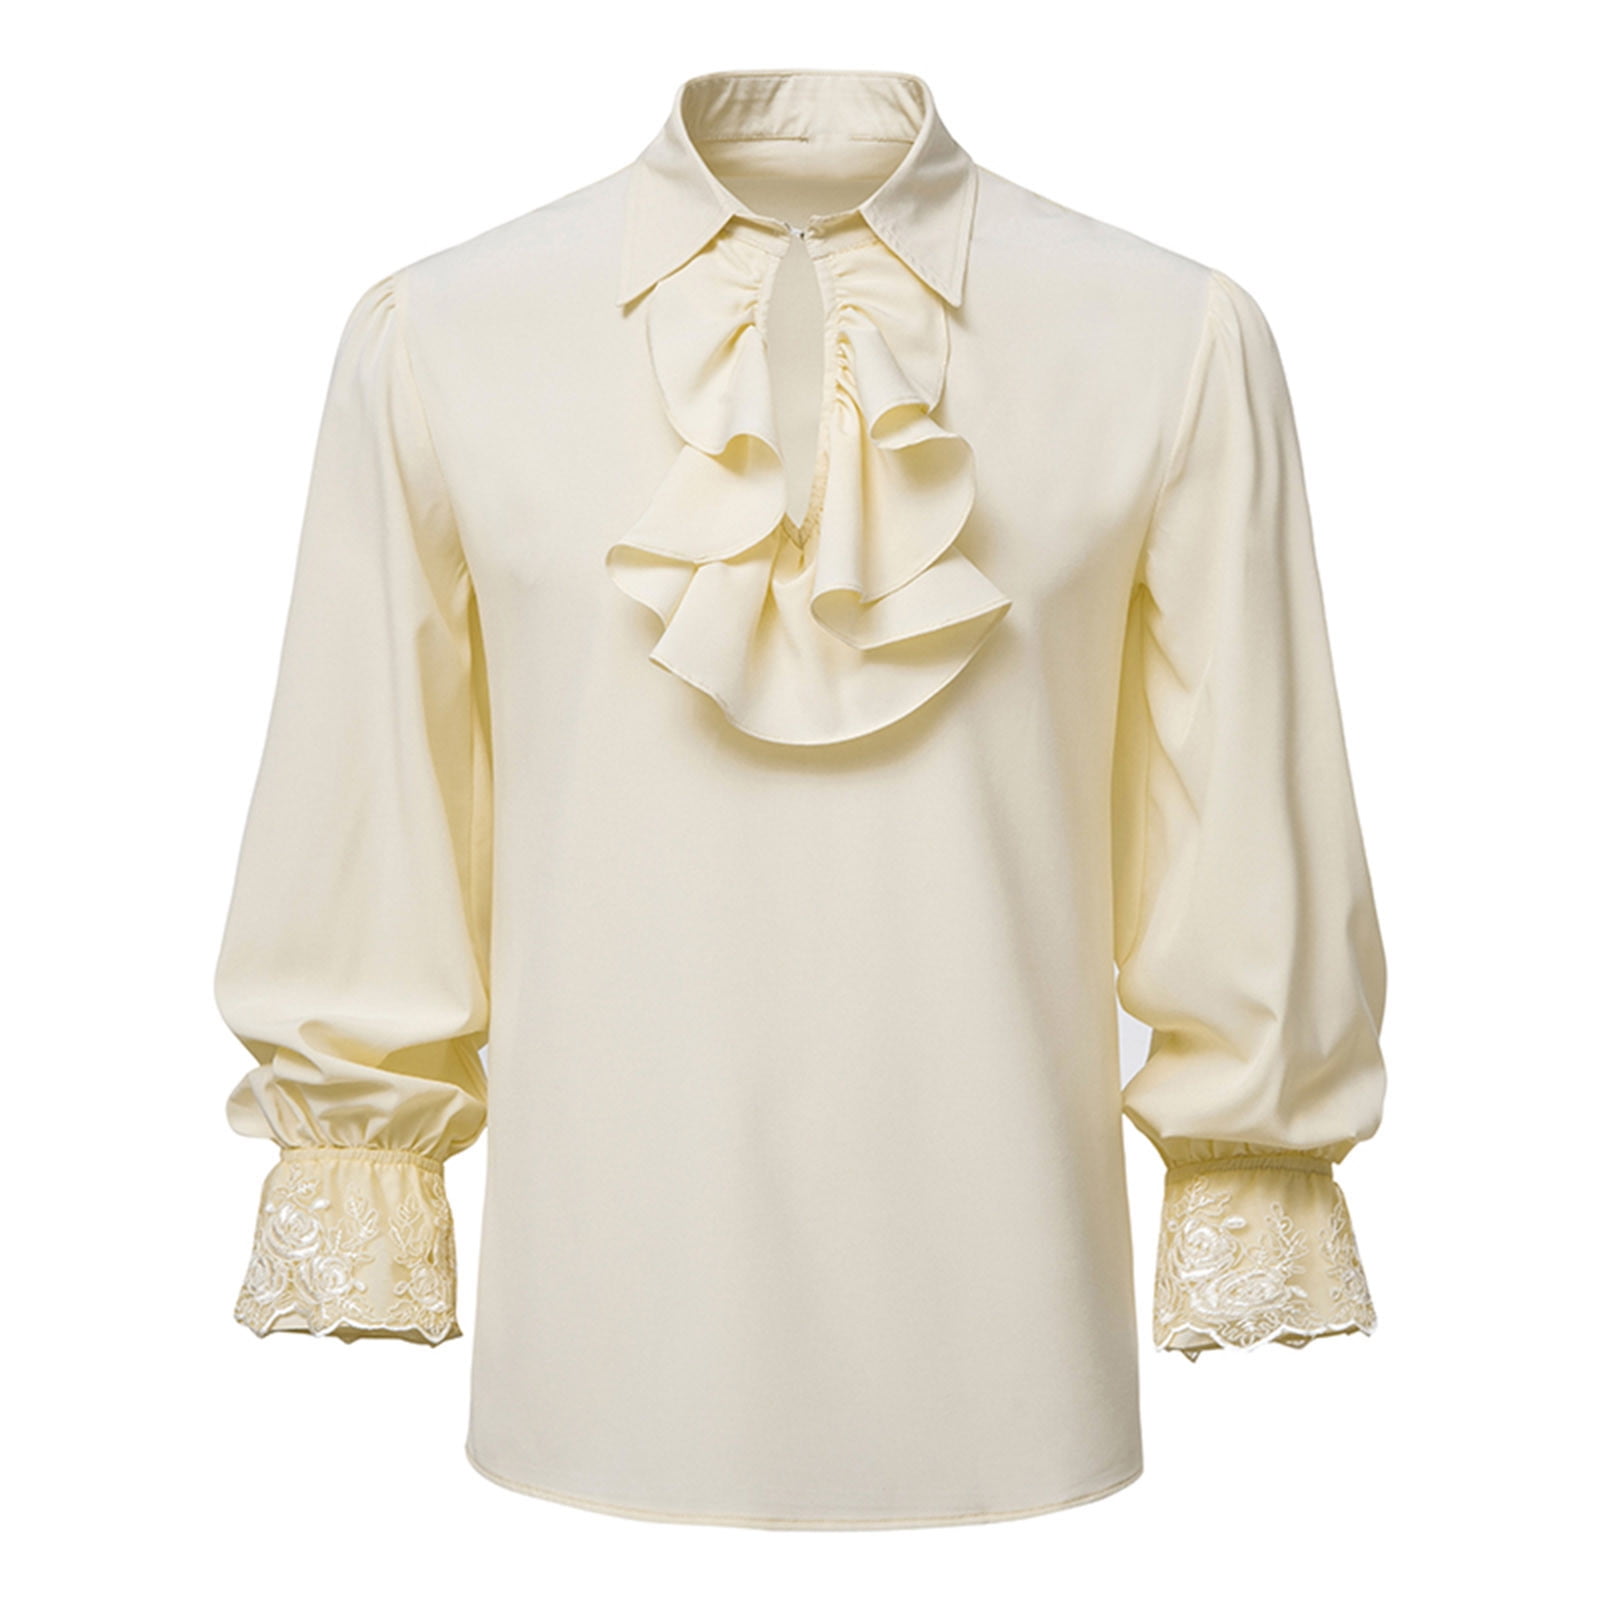 Elegant 19th Century Linen Chemise with Ruffled Cuffs